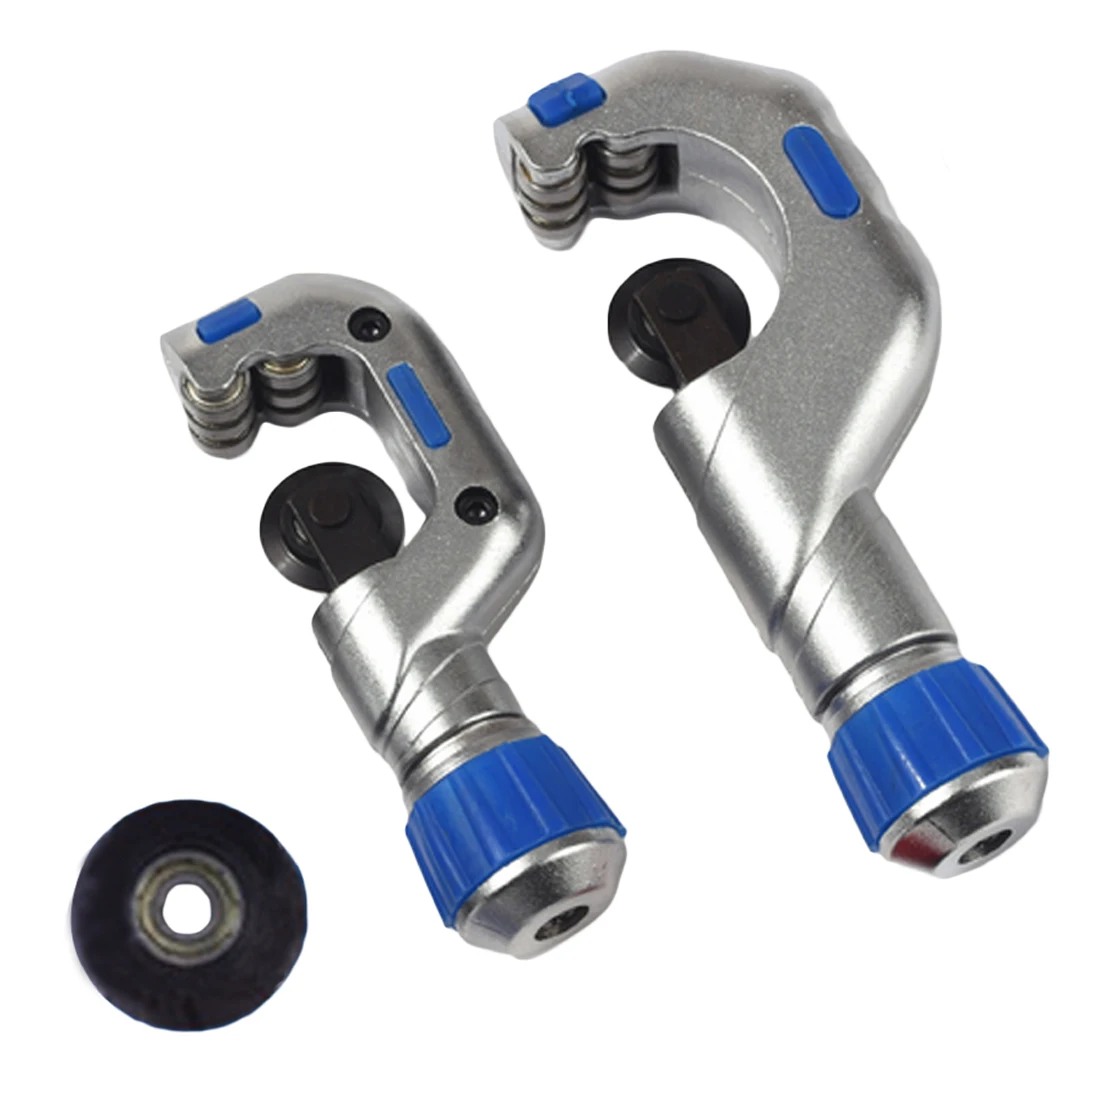 for Coppe Roller Tube Cutter 4-32mm 4-32mm/5-50mm Tube Cutting Tool